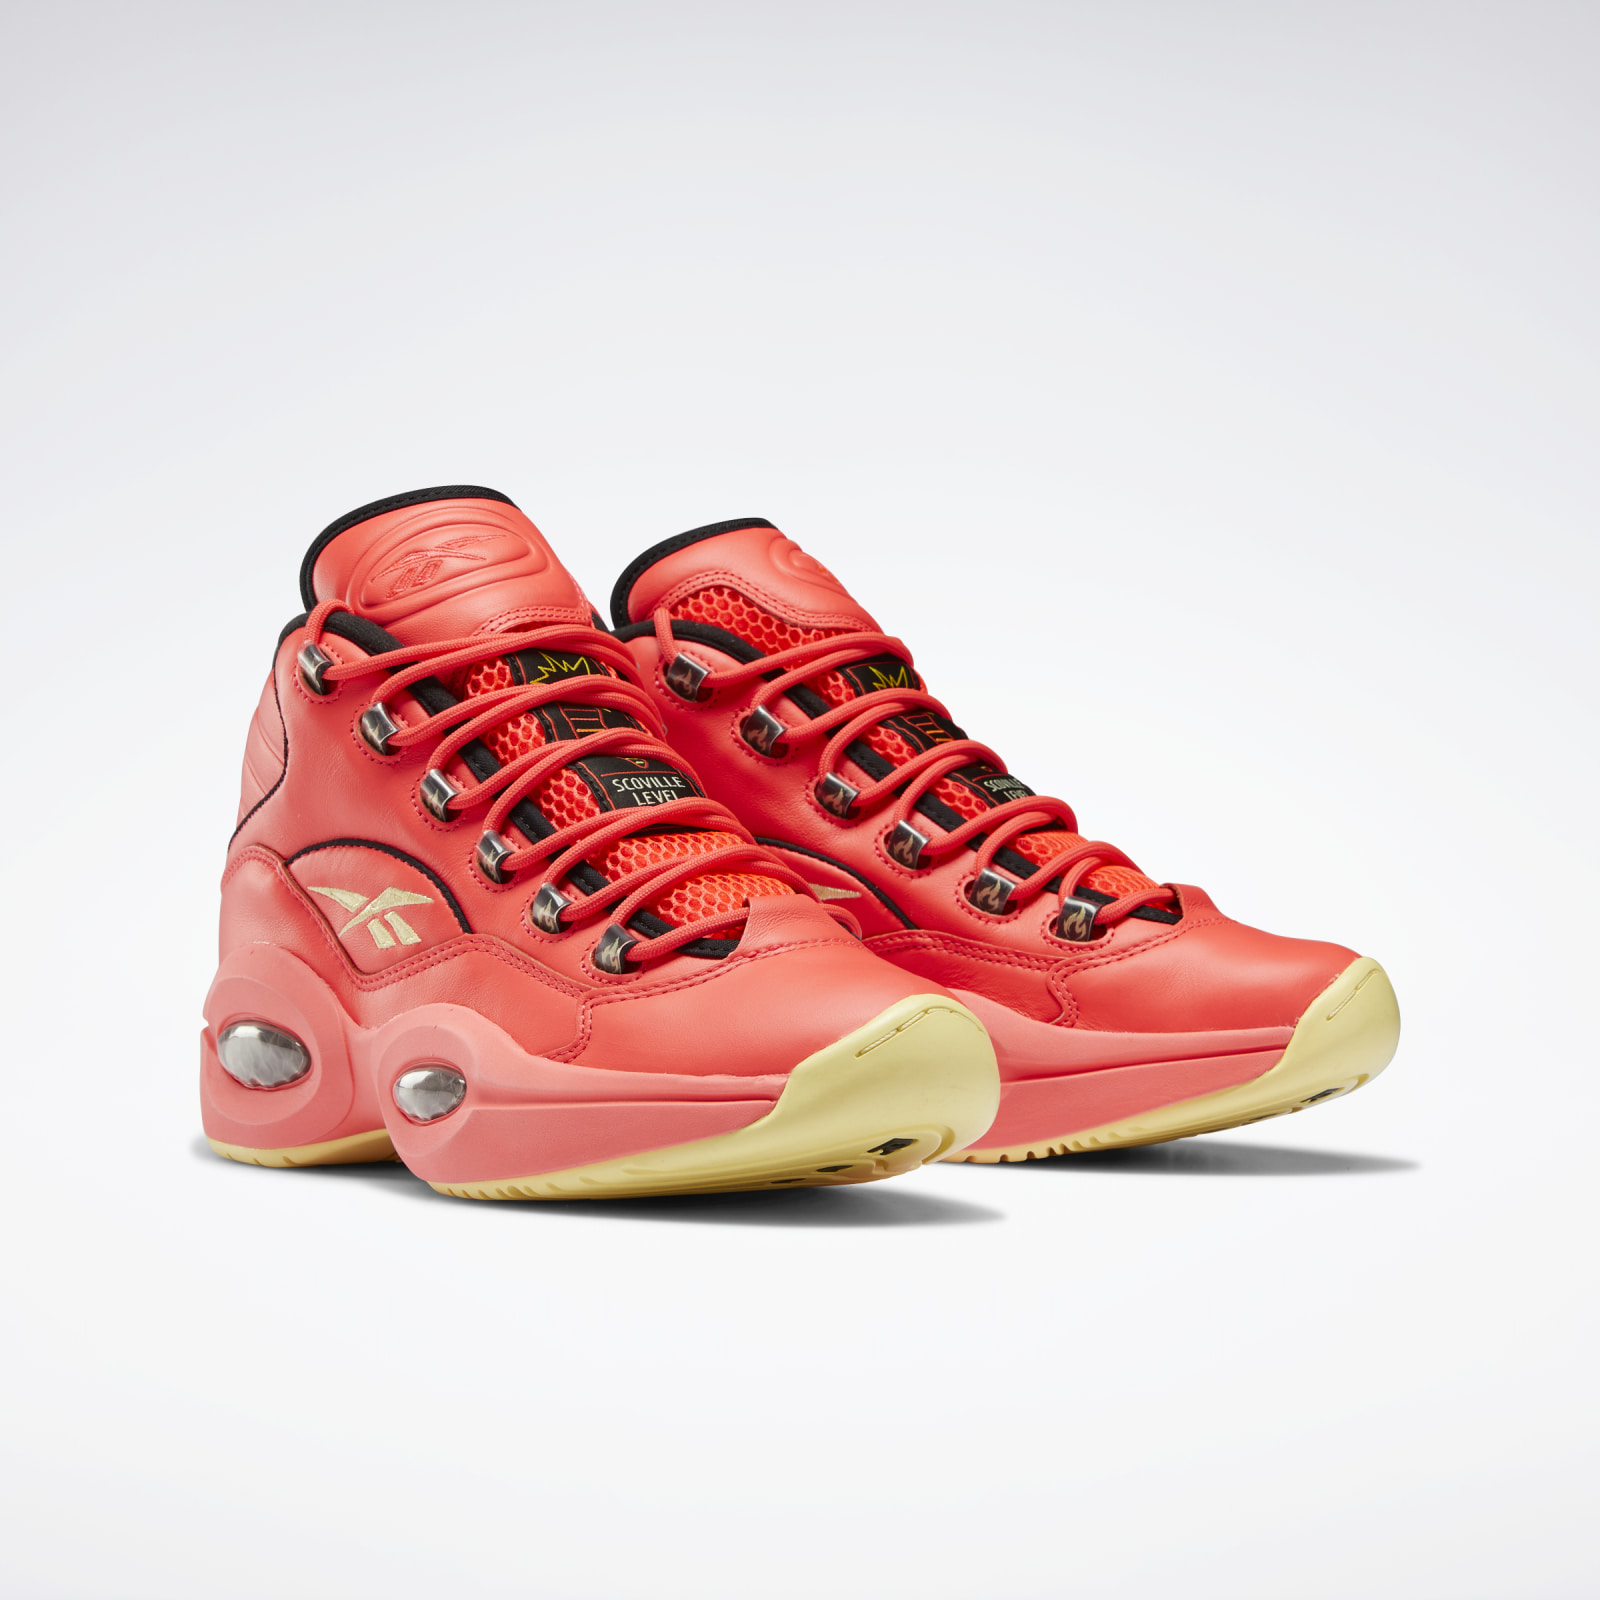 Reebok x Hot Ones
Question Mid
« The Last Dab »